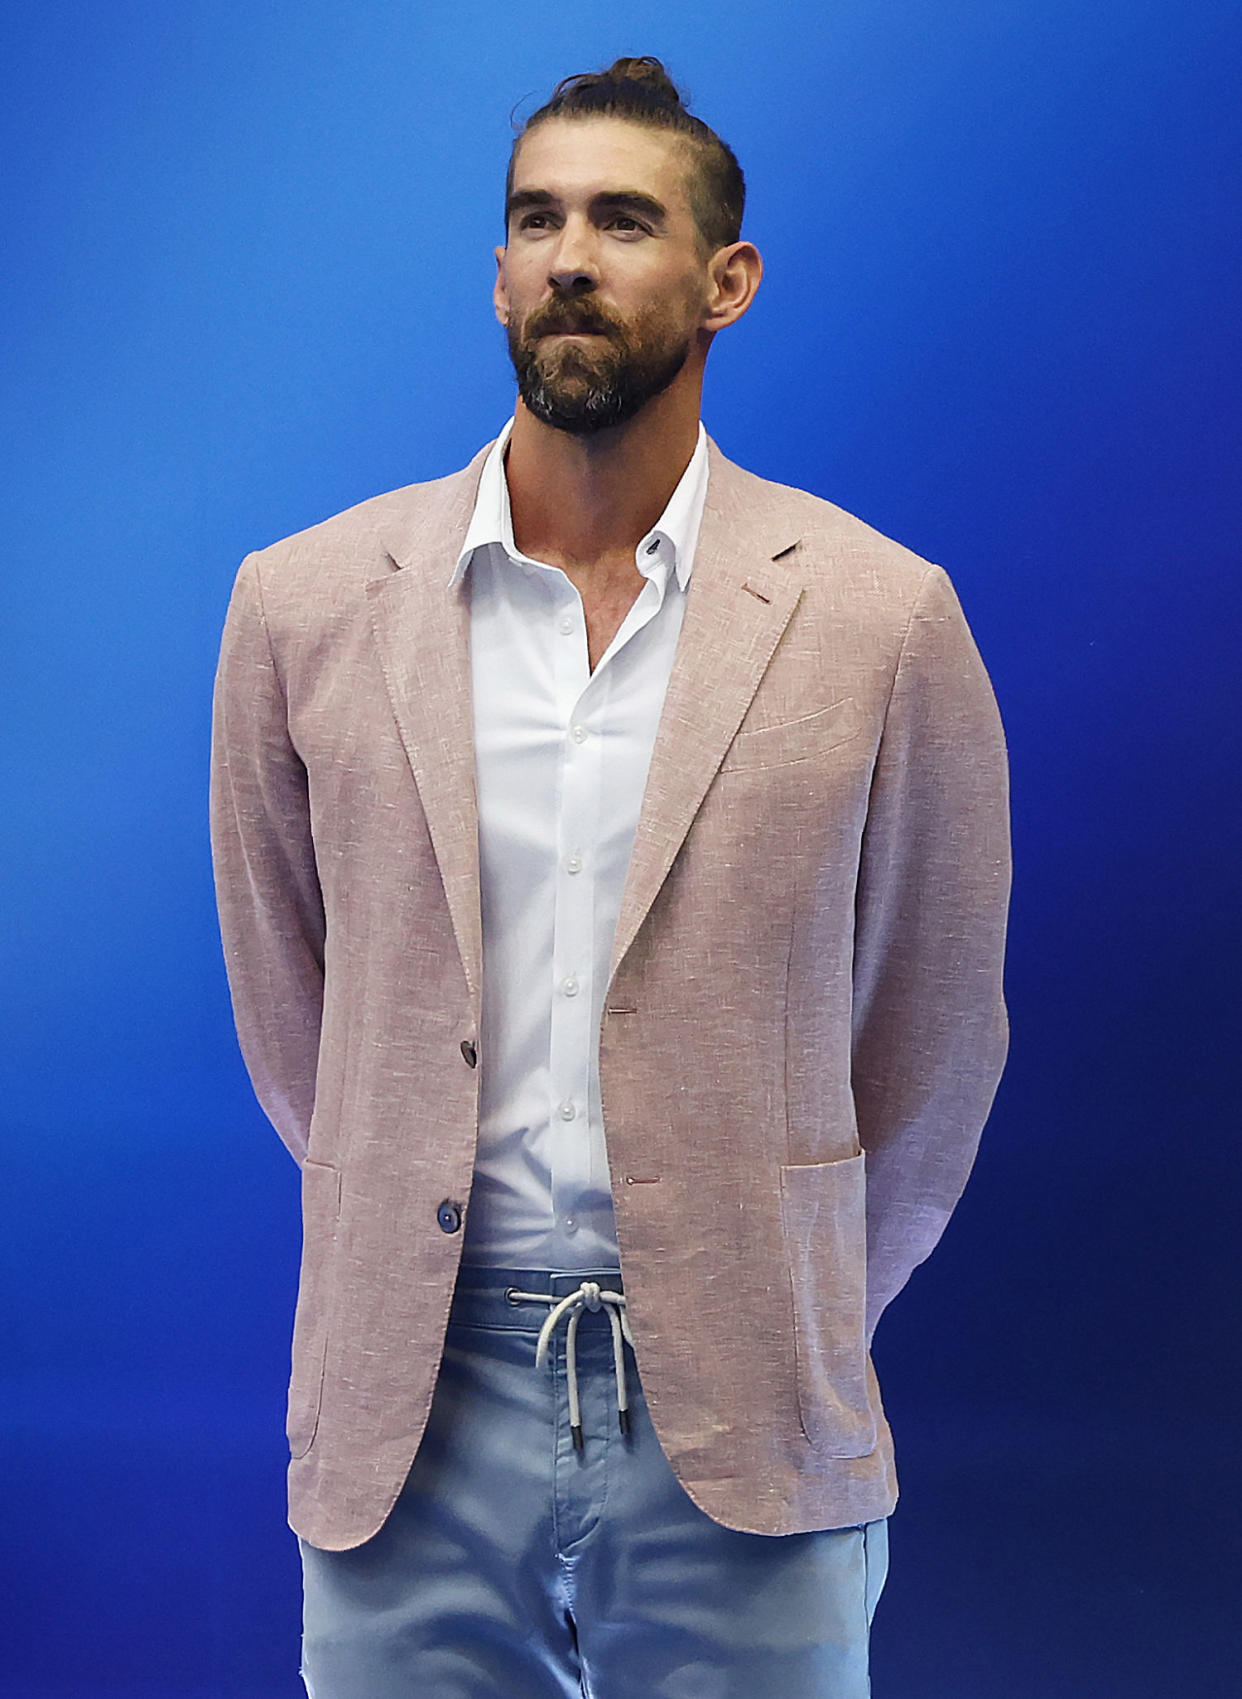 Michael Phelps on blue background. (Ian MacNicol / Getty Images)